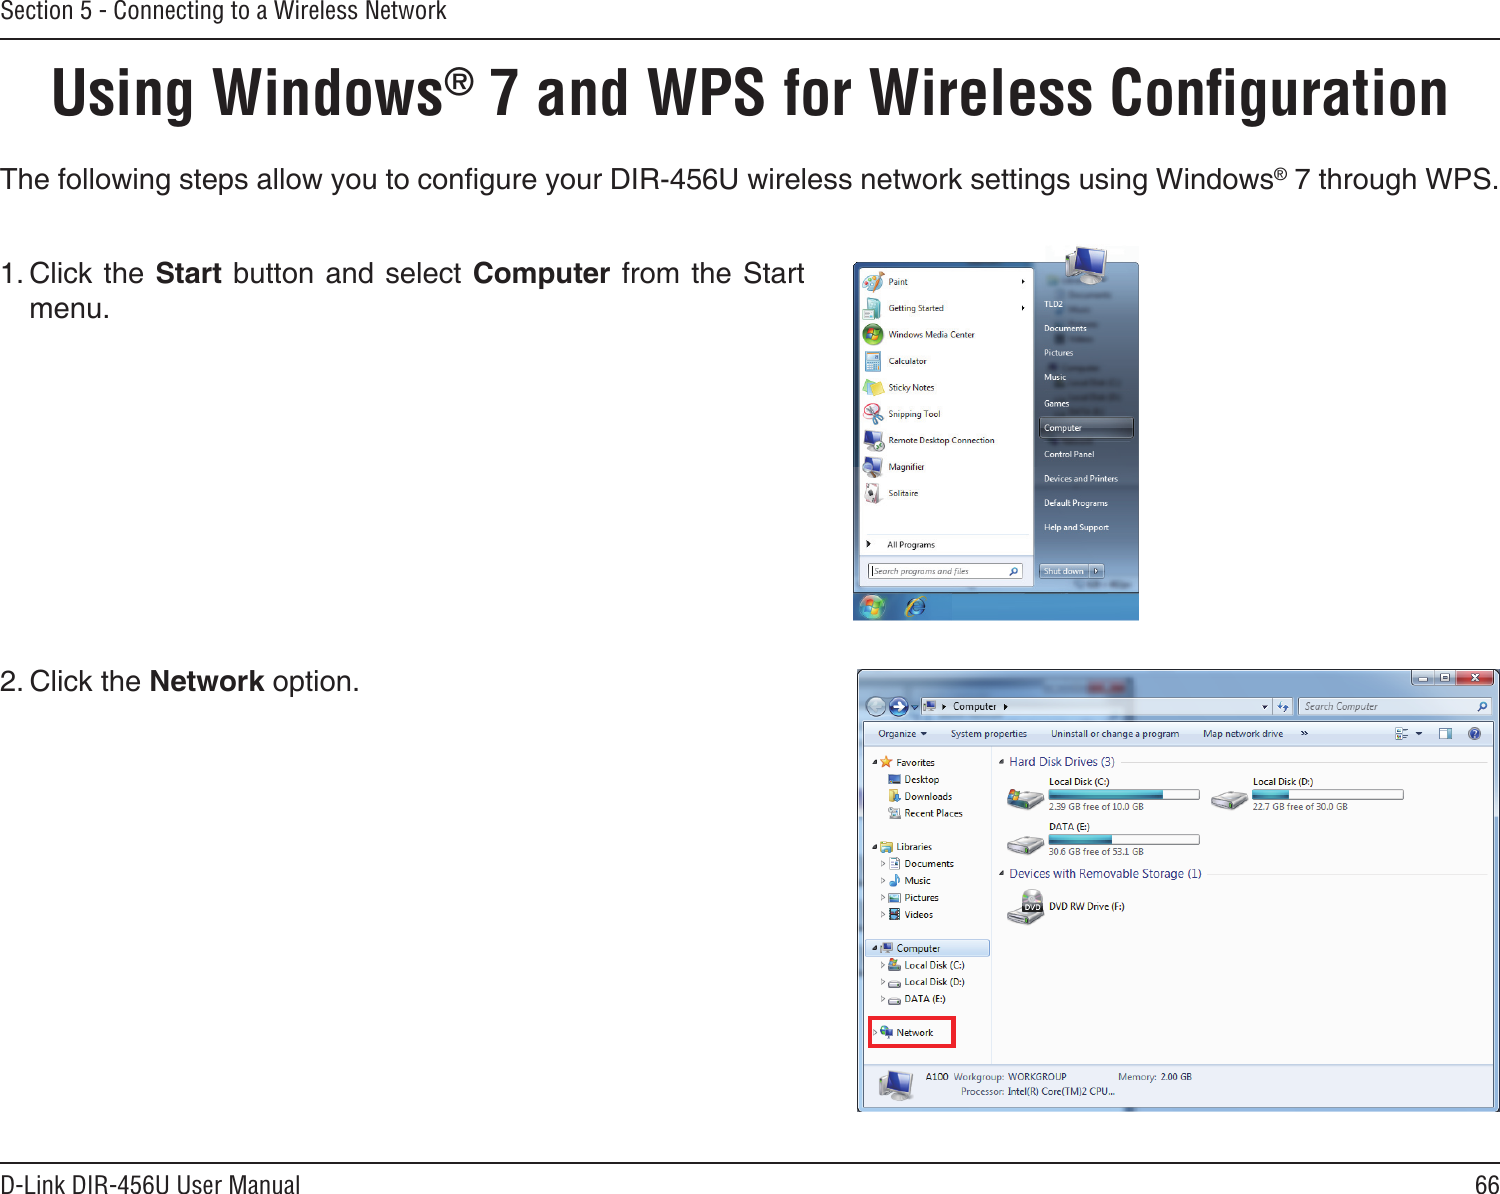 66D-Link DIR-456U User ManualSection 5 - Connecting to a Wireless NetworkUsing Windows® 7 and WPS for Wireless ConﬁgurationThe following steps allow you to congure your DIR-456U wireless network settings using Windows® 7 through WPS.1. Click the Start button and select Computer from the Start menu.2. Click the Network option.